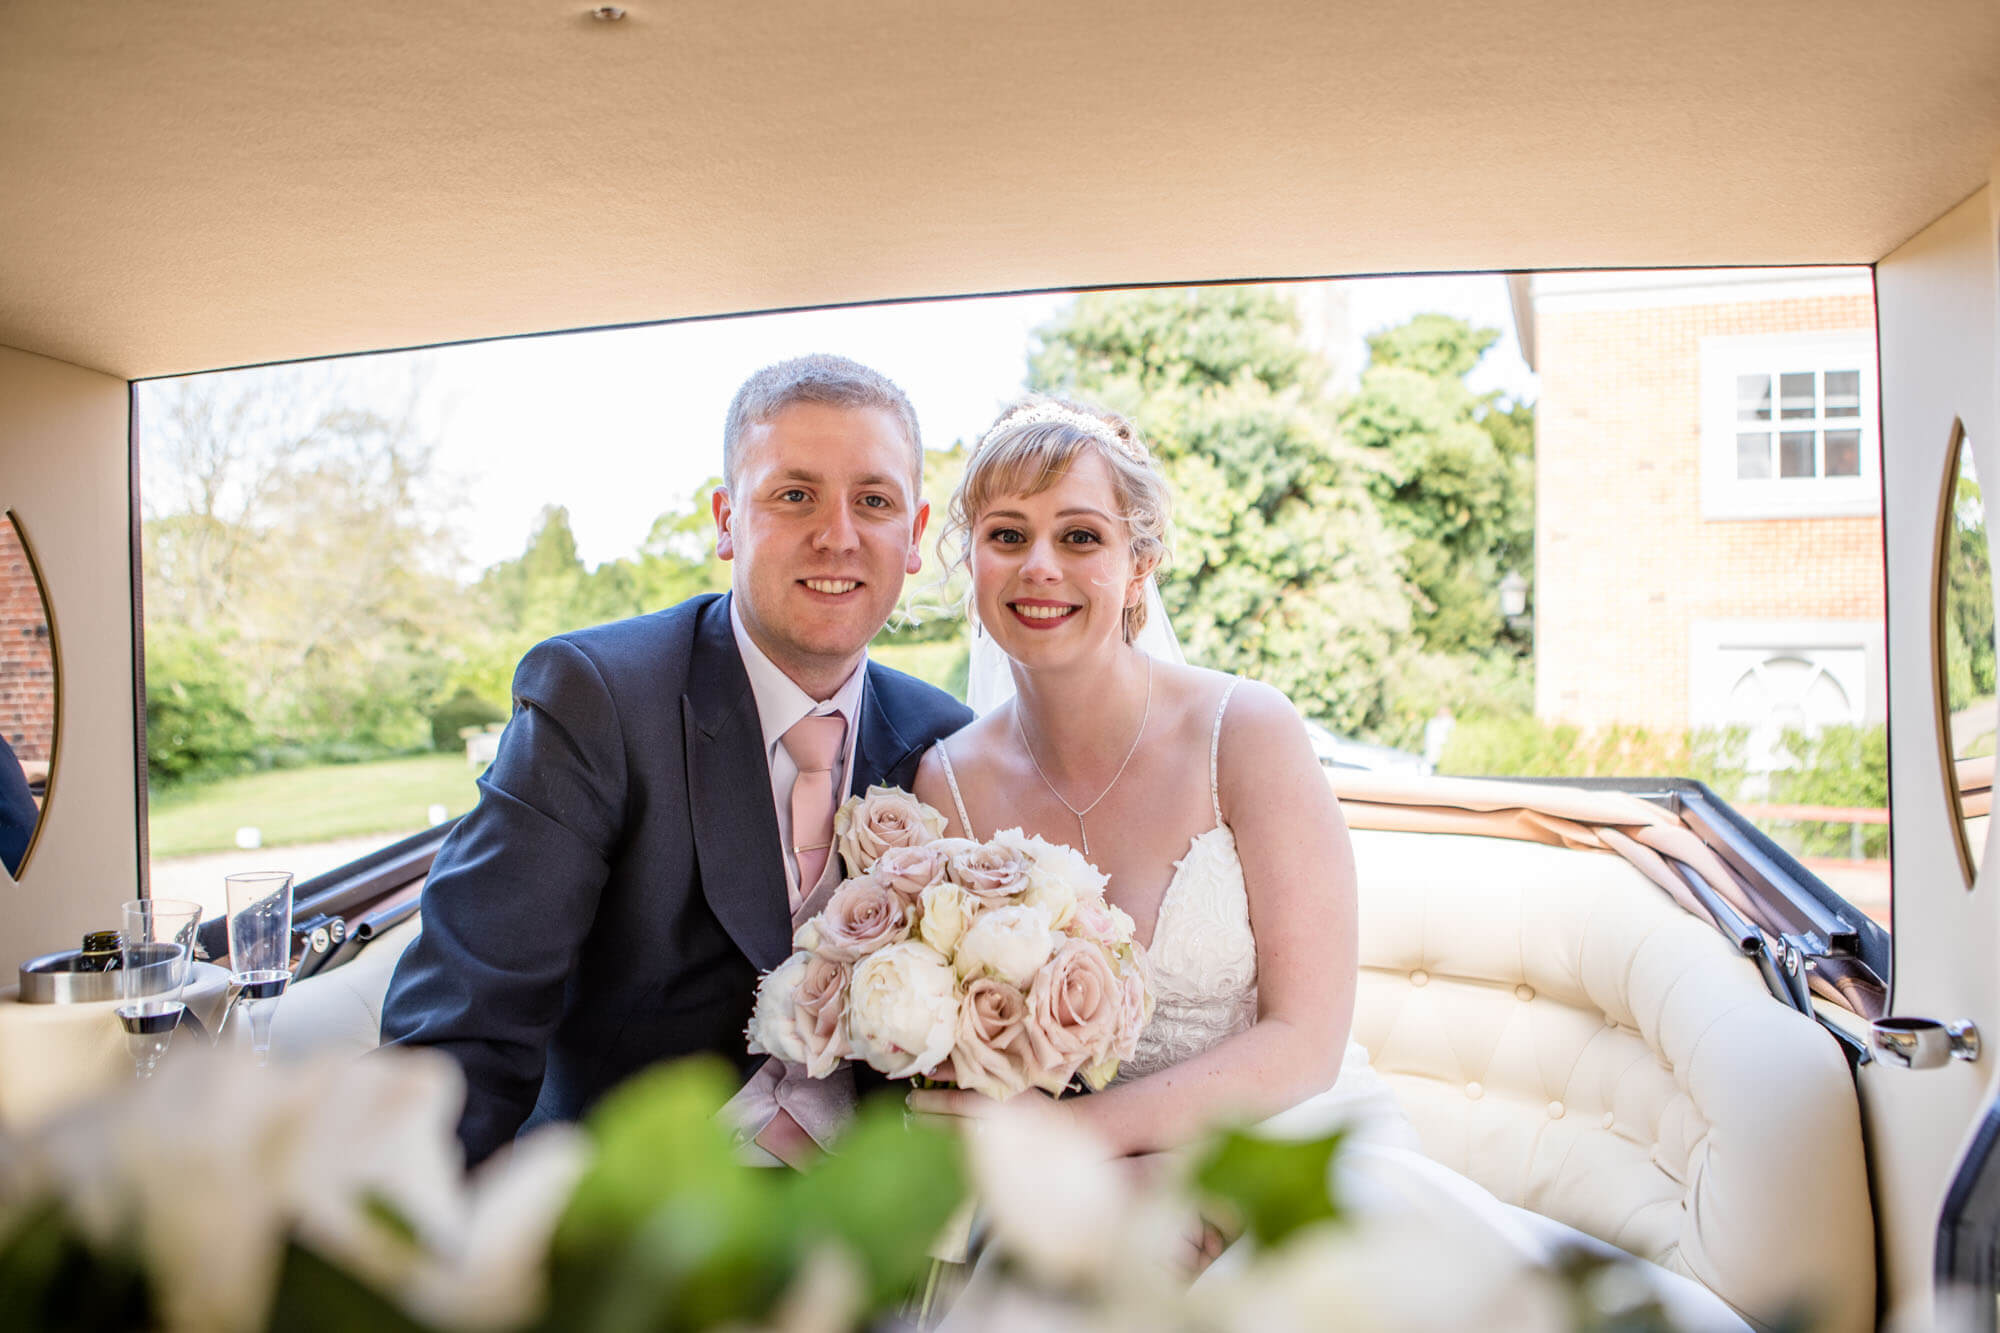 the bride and groom sit together in the vintage wedding car and she holds her bridal bouquet of pink and white roses